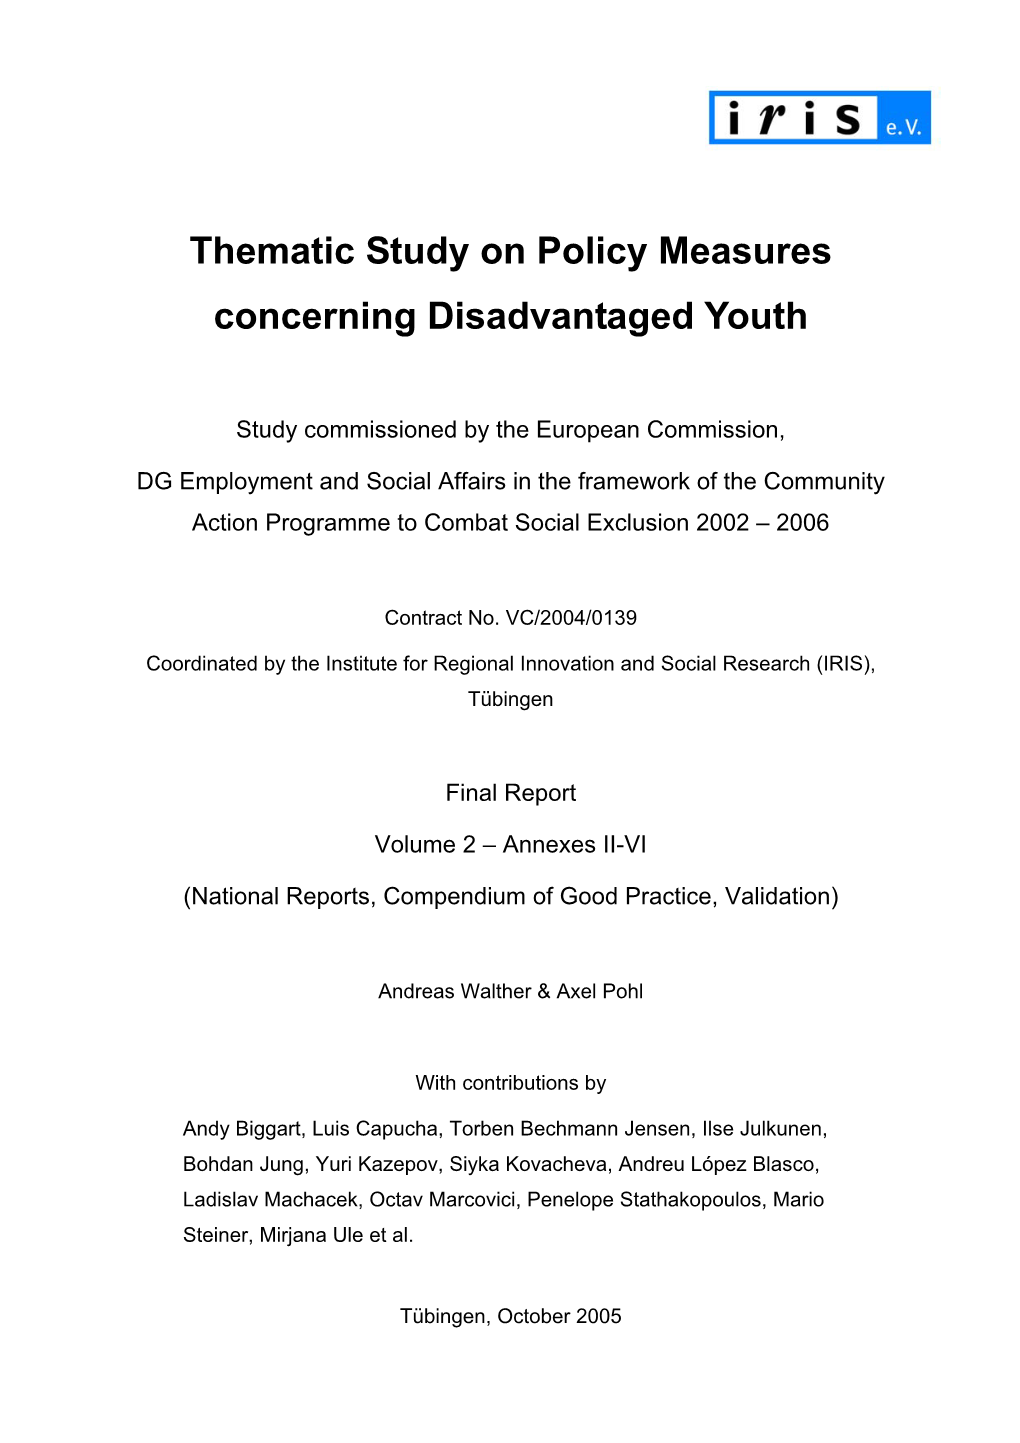 Thematic Study on Policy Measures Concerning Disadvantaged Youth